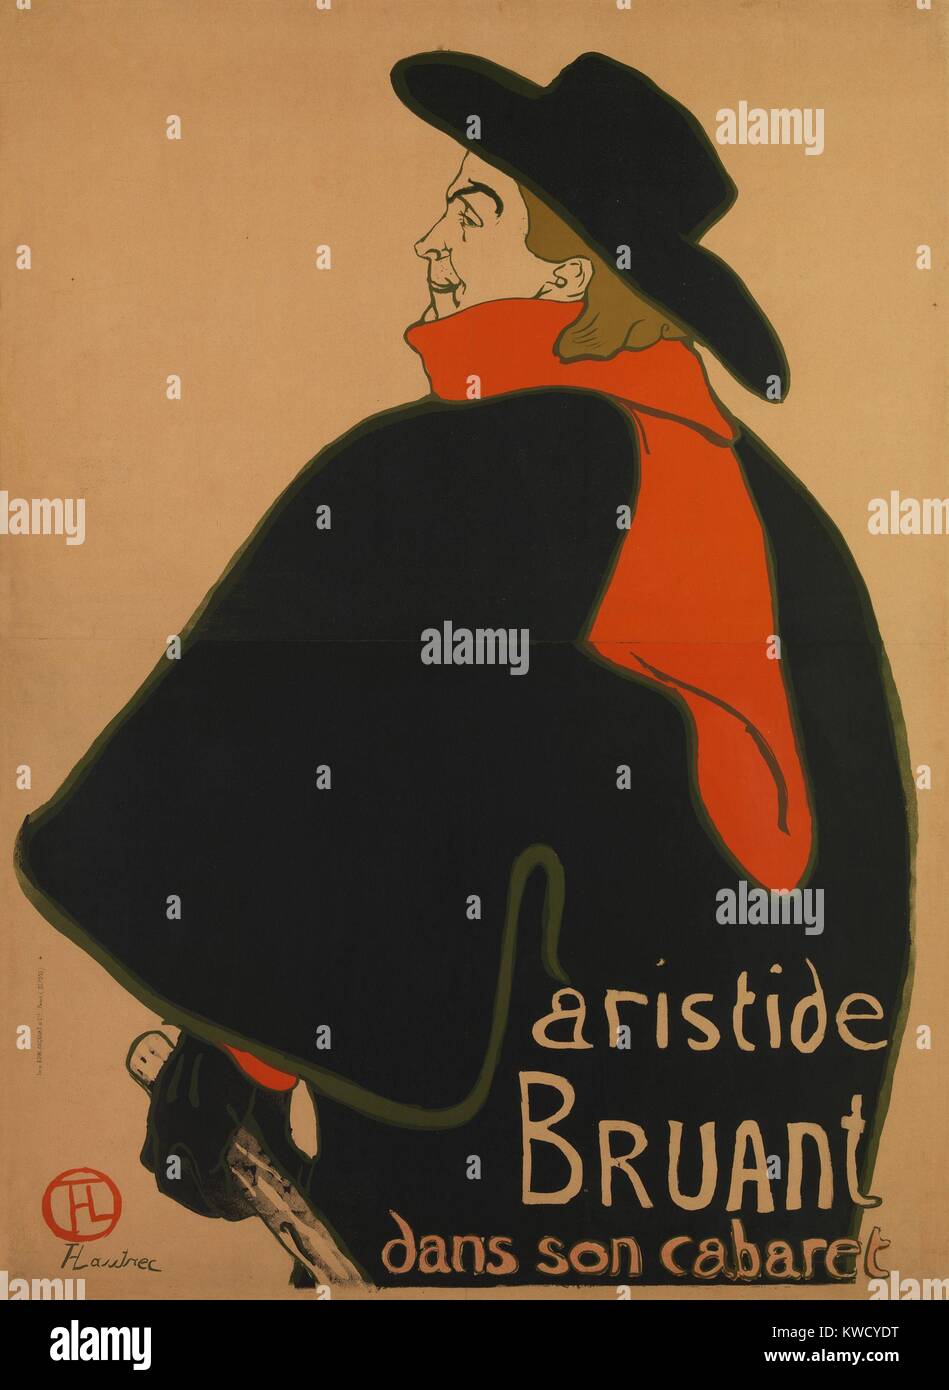 Aristide Bruant, at His Cabaret, by Henri de Toulouse-Lautrec, 1893, French Post-Impressionist print. Lautrec made this lithographic poster to promote performances of singer Aristide Bruant at up-scale cafe-concerts on the Champs-Elysees. Lautrec emphasiz (BSLOC 2017 5 68) Stock Photo